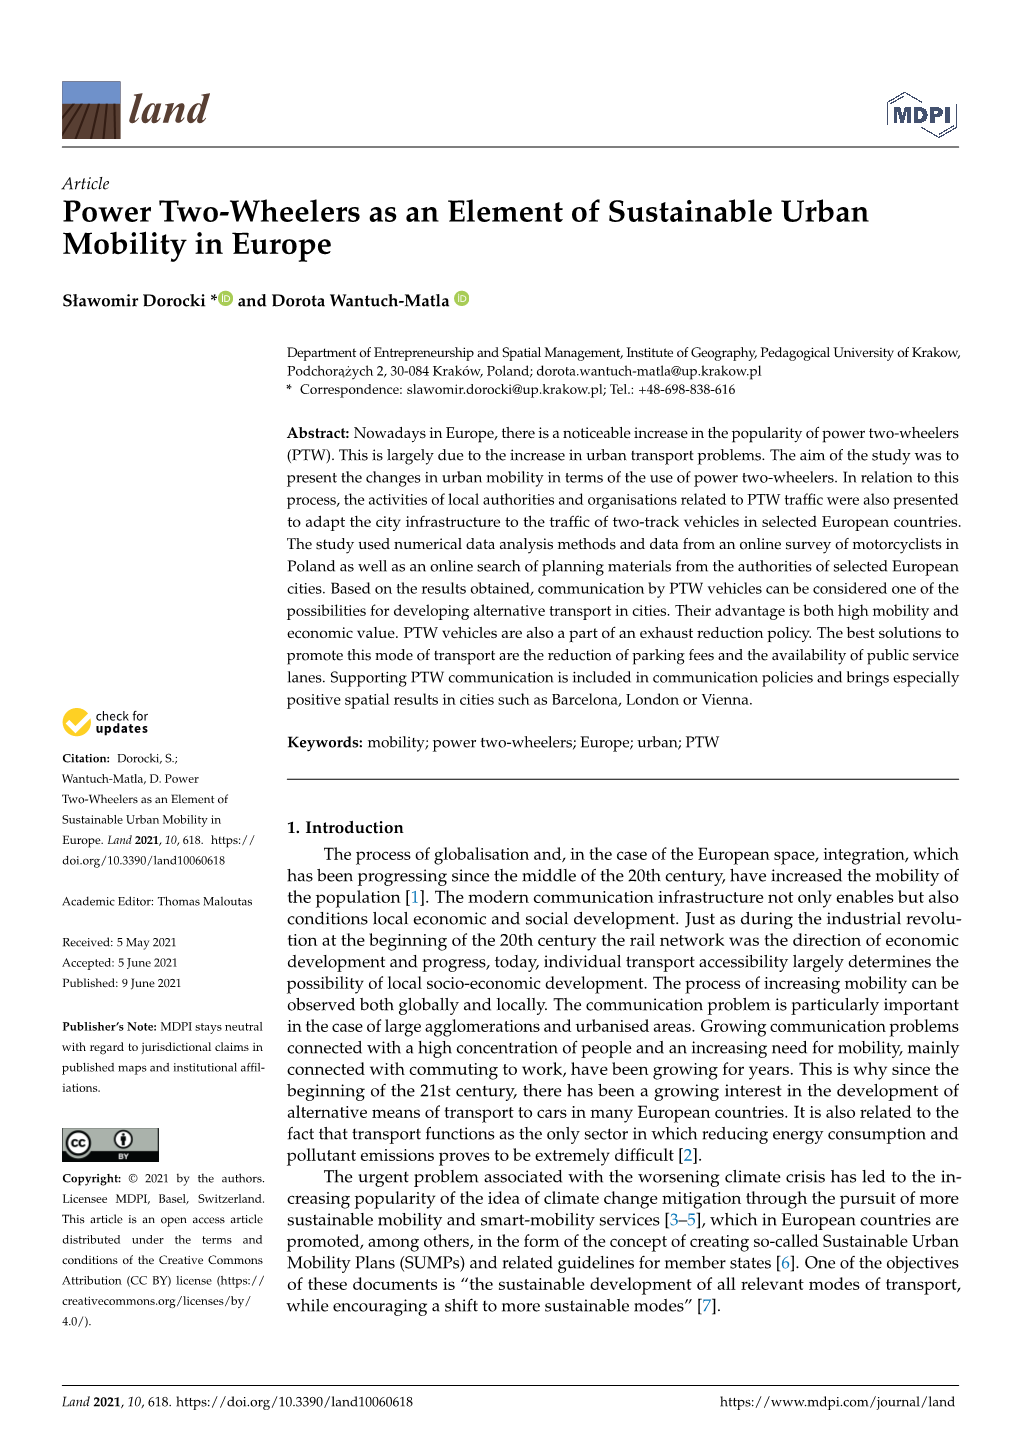 Power Two-Wheelers As an Element of Sustainable Urban Mobility in Europe